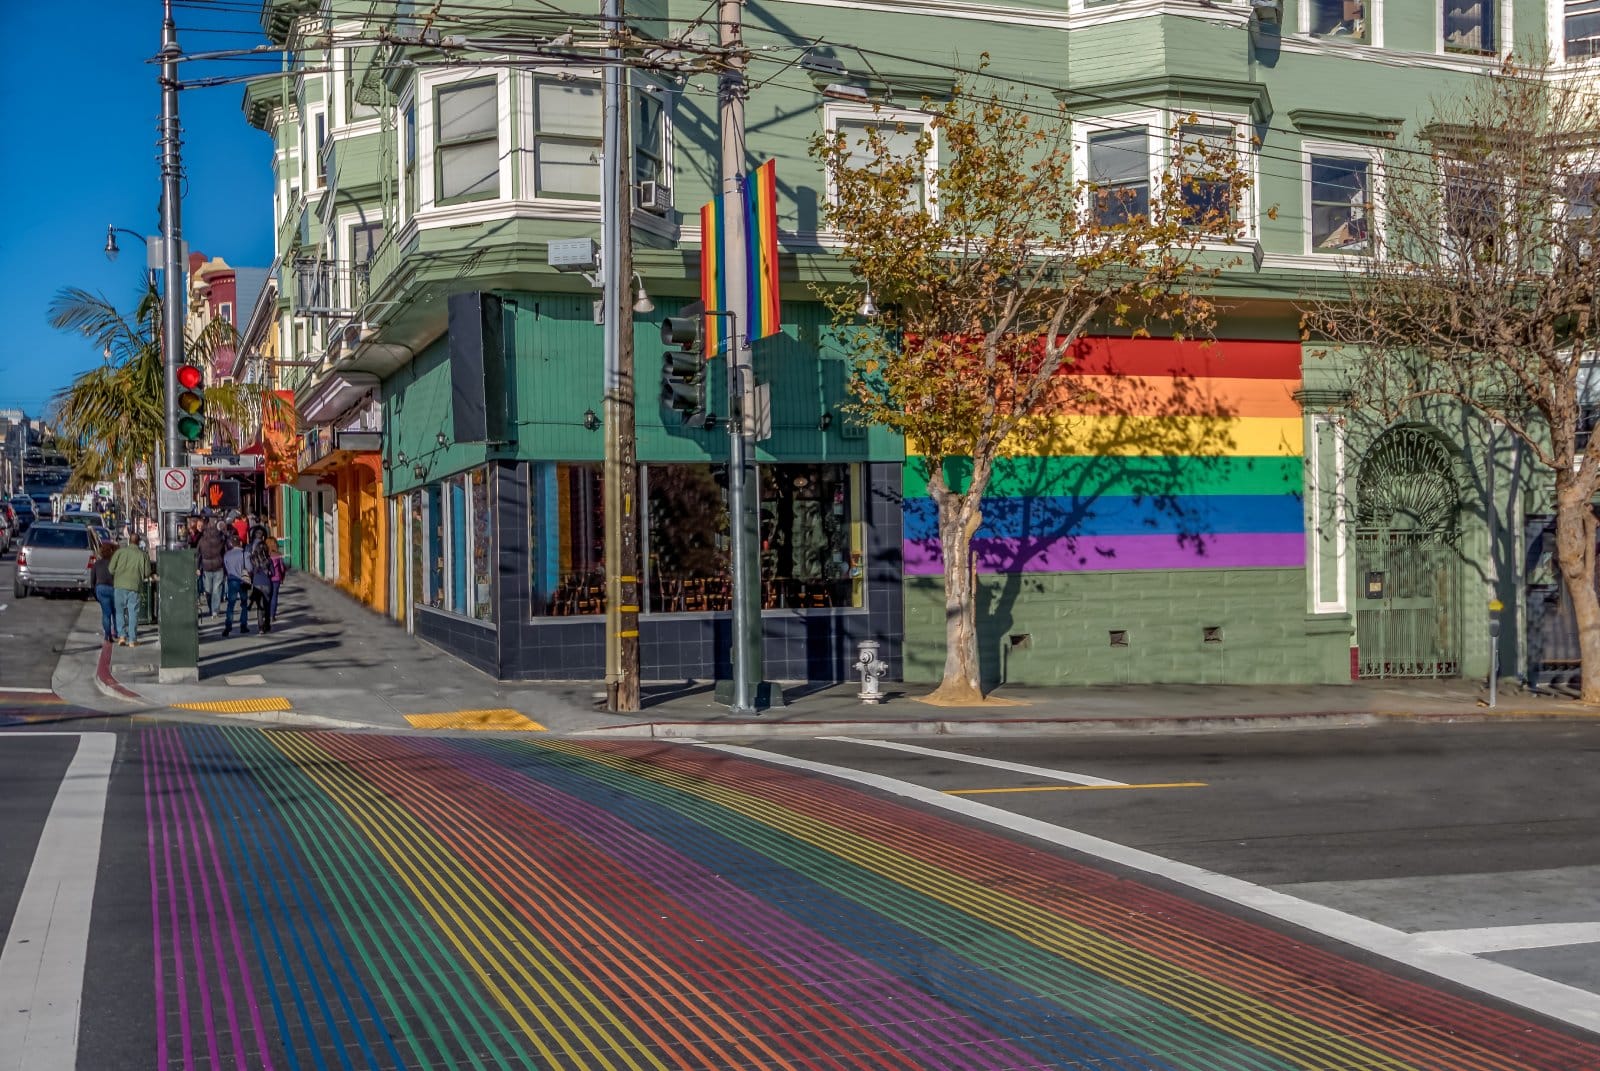 Image Credit: Shutterstock / Diego Grandi <p><span>The Castro district is world-renowned as a gay mecca, with San Francisco being at the forefront of LGBTQ+ rights for decades.</span></p>